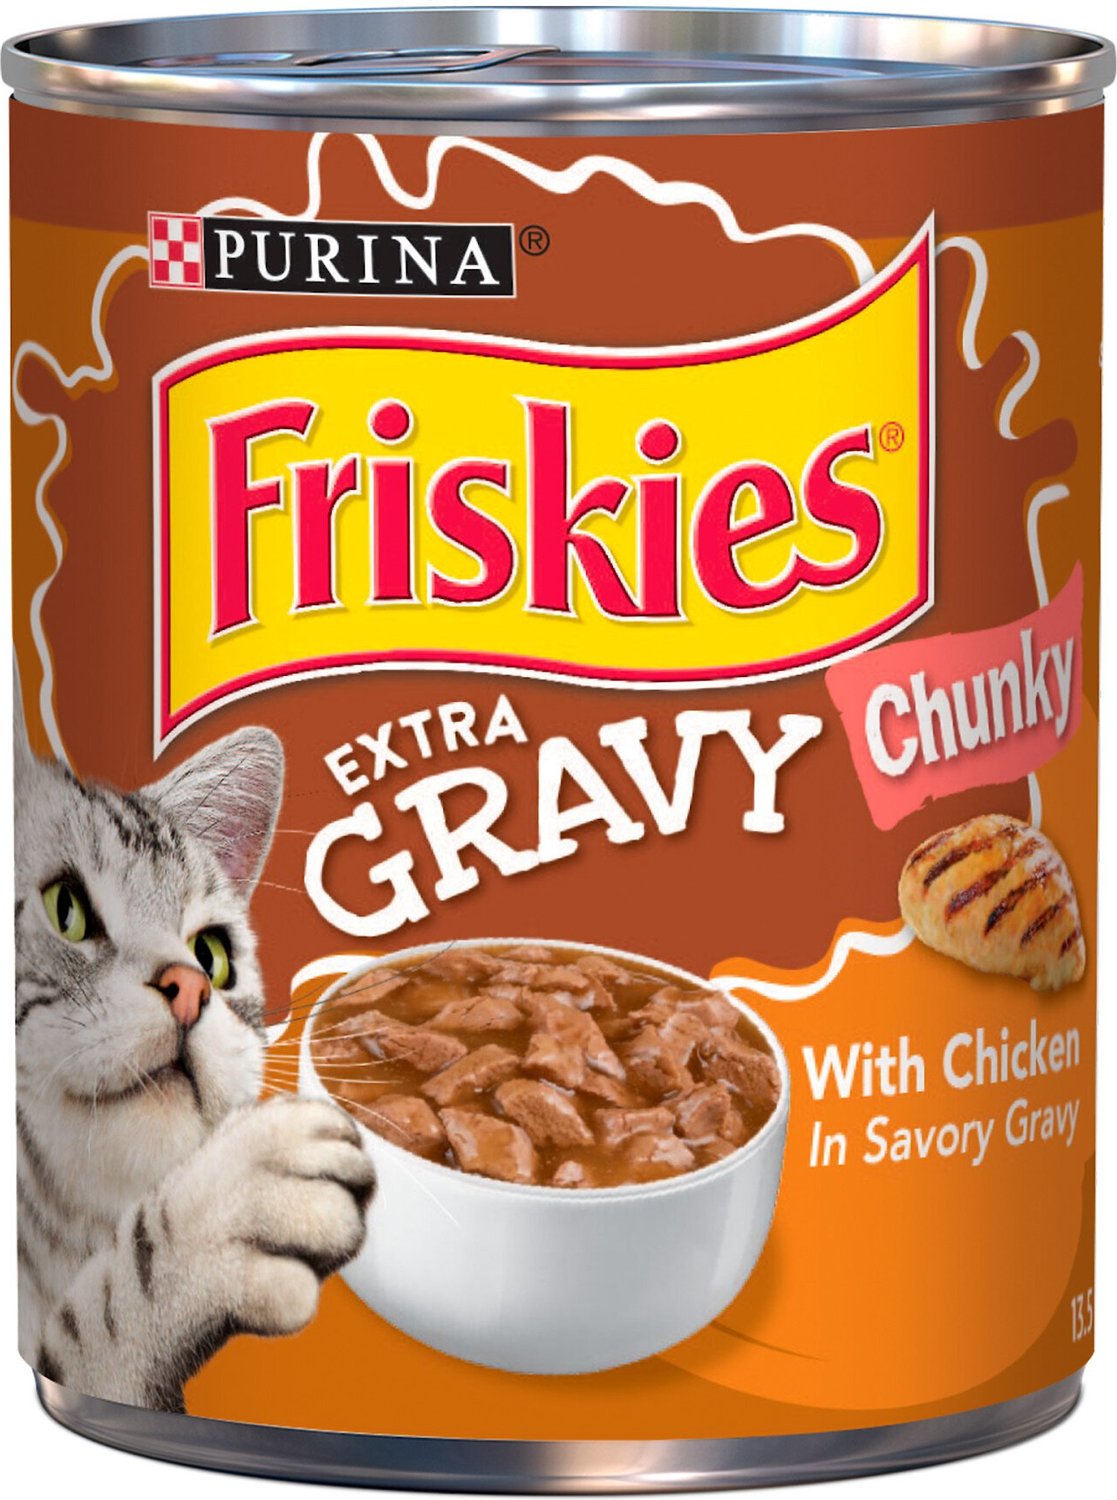 Friskies Extra Gravy Chunky With Chicken in Savory Gravy Canned Cat